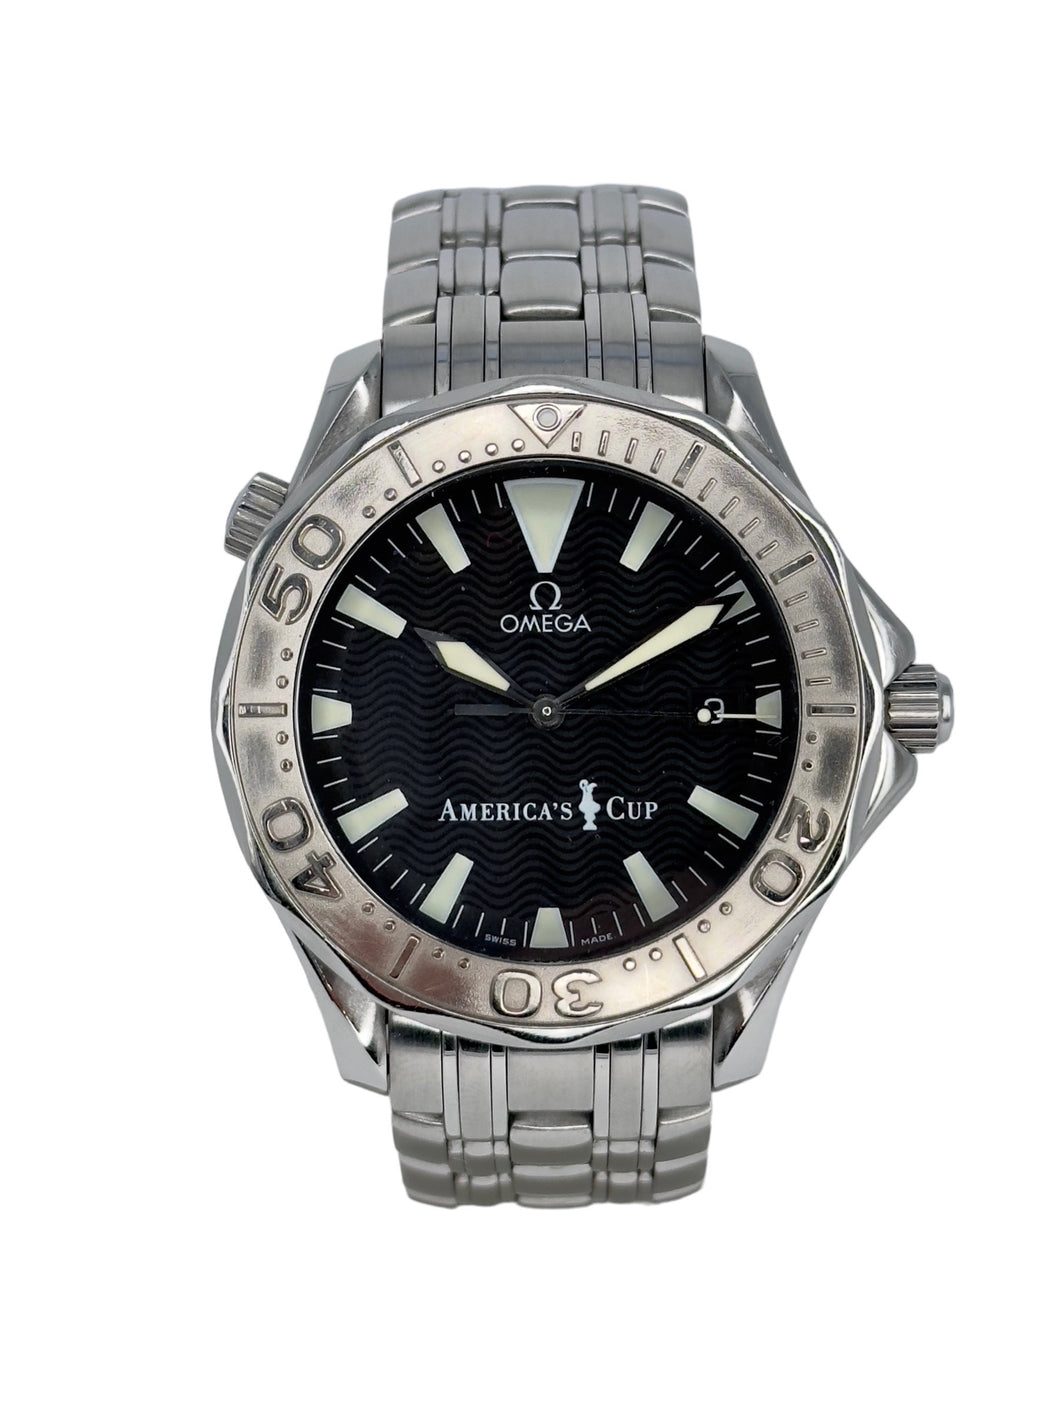 Omega Seamaster Diver 300M America’s Cup 2533.50.00 year 2001